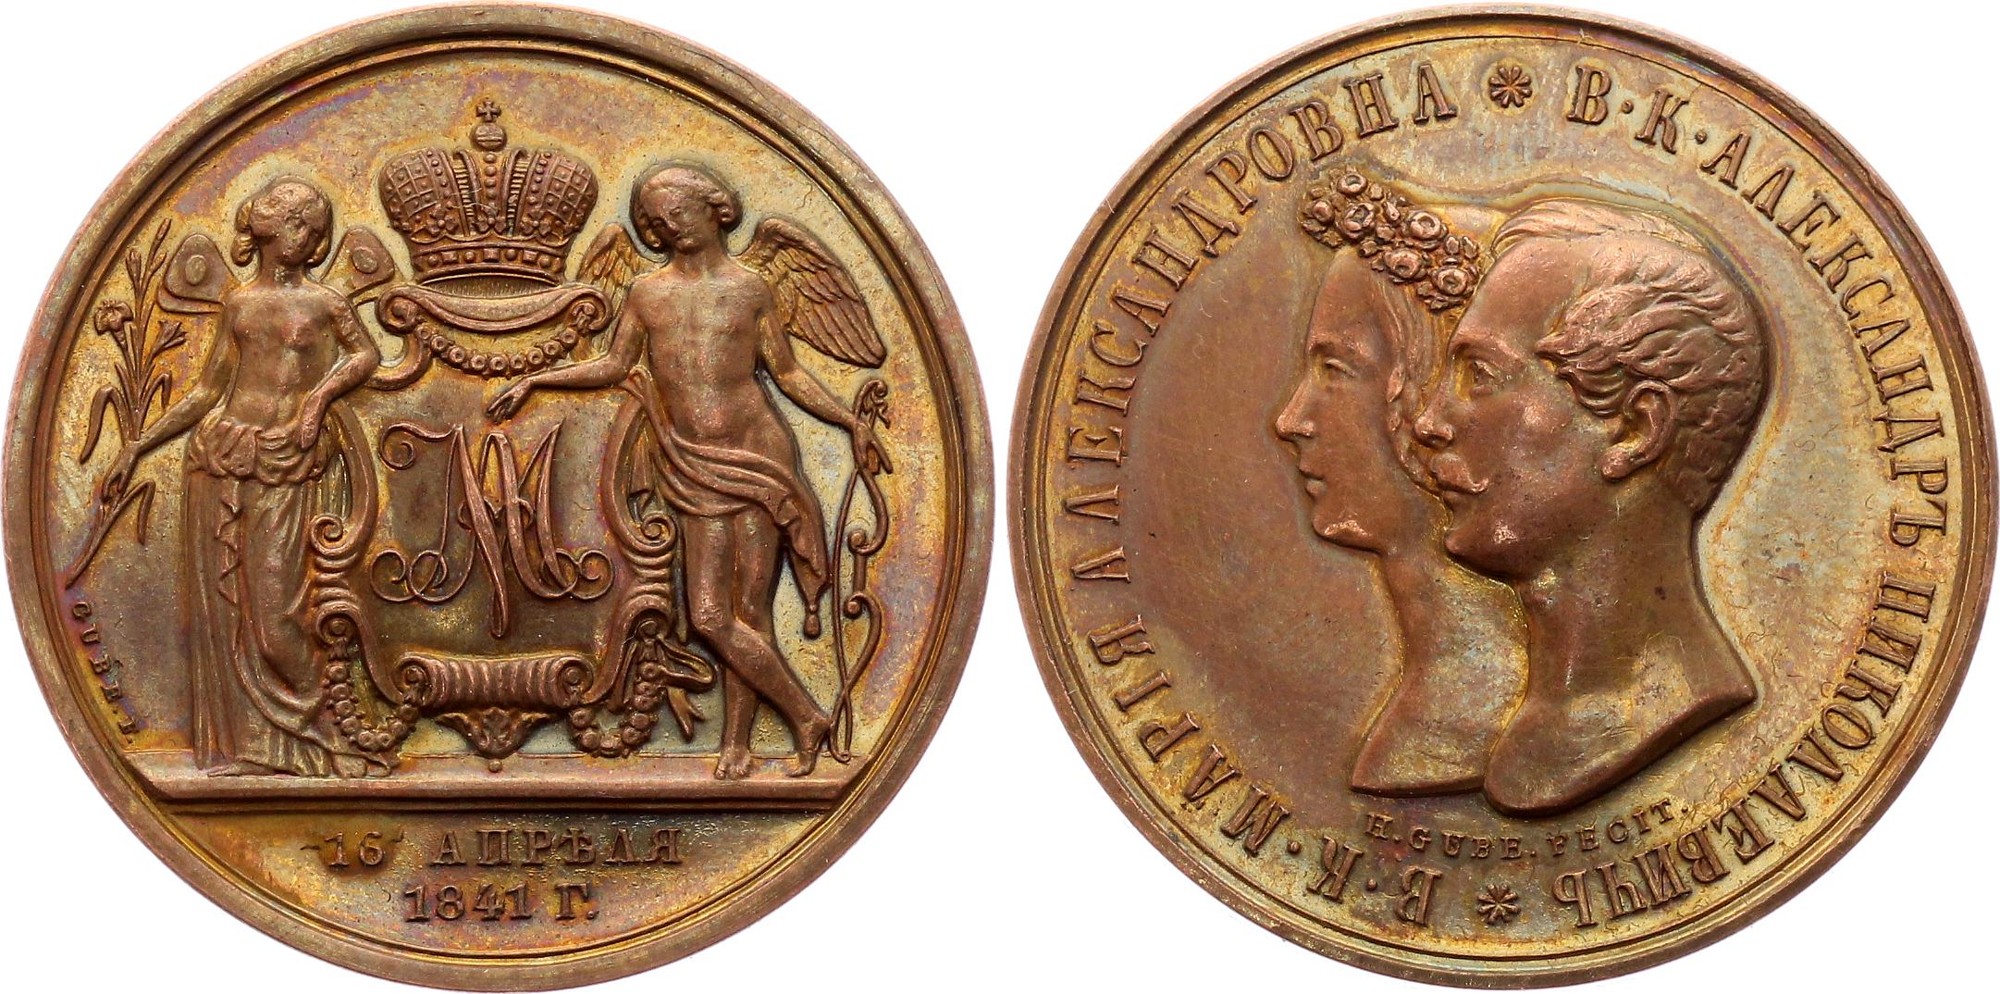 Russia Marriage Ruble (Medal) 1841 - Copper